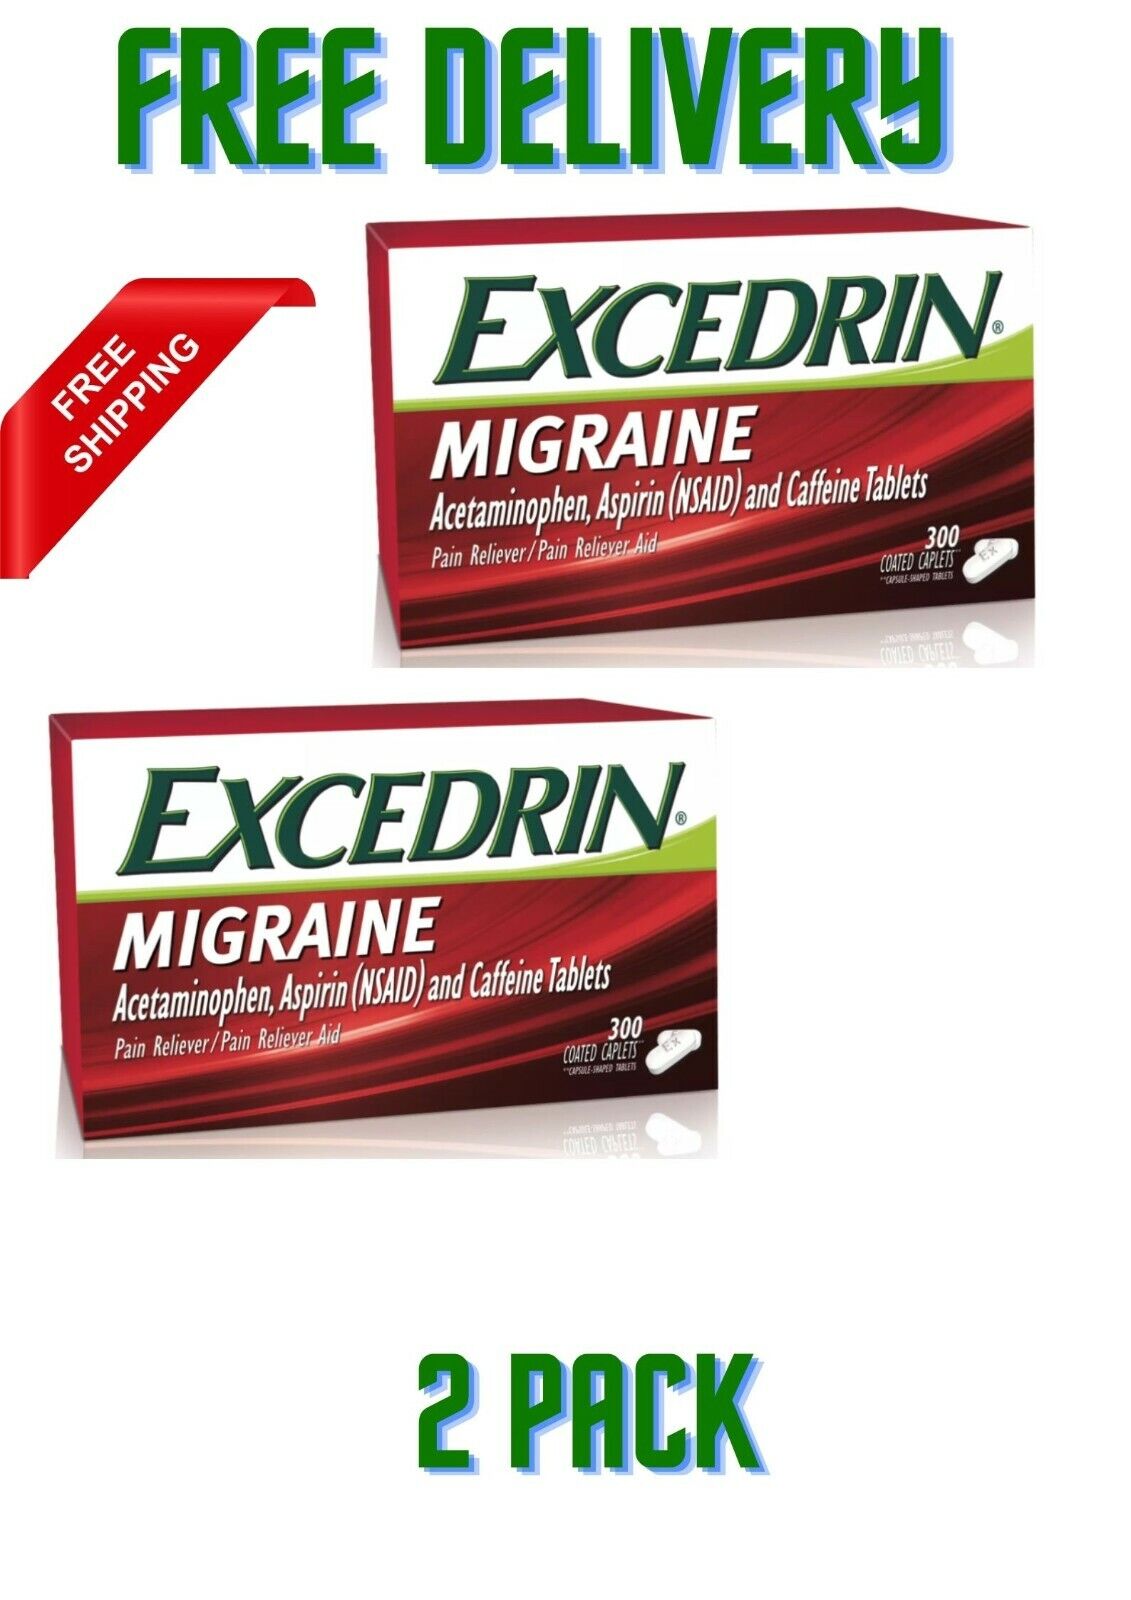 Excedrin Migraine Coated Caplets (300 ct.) 2 PACK free shipping